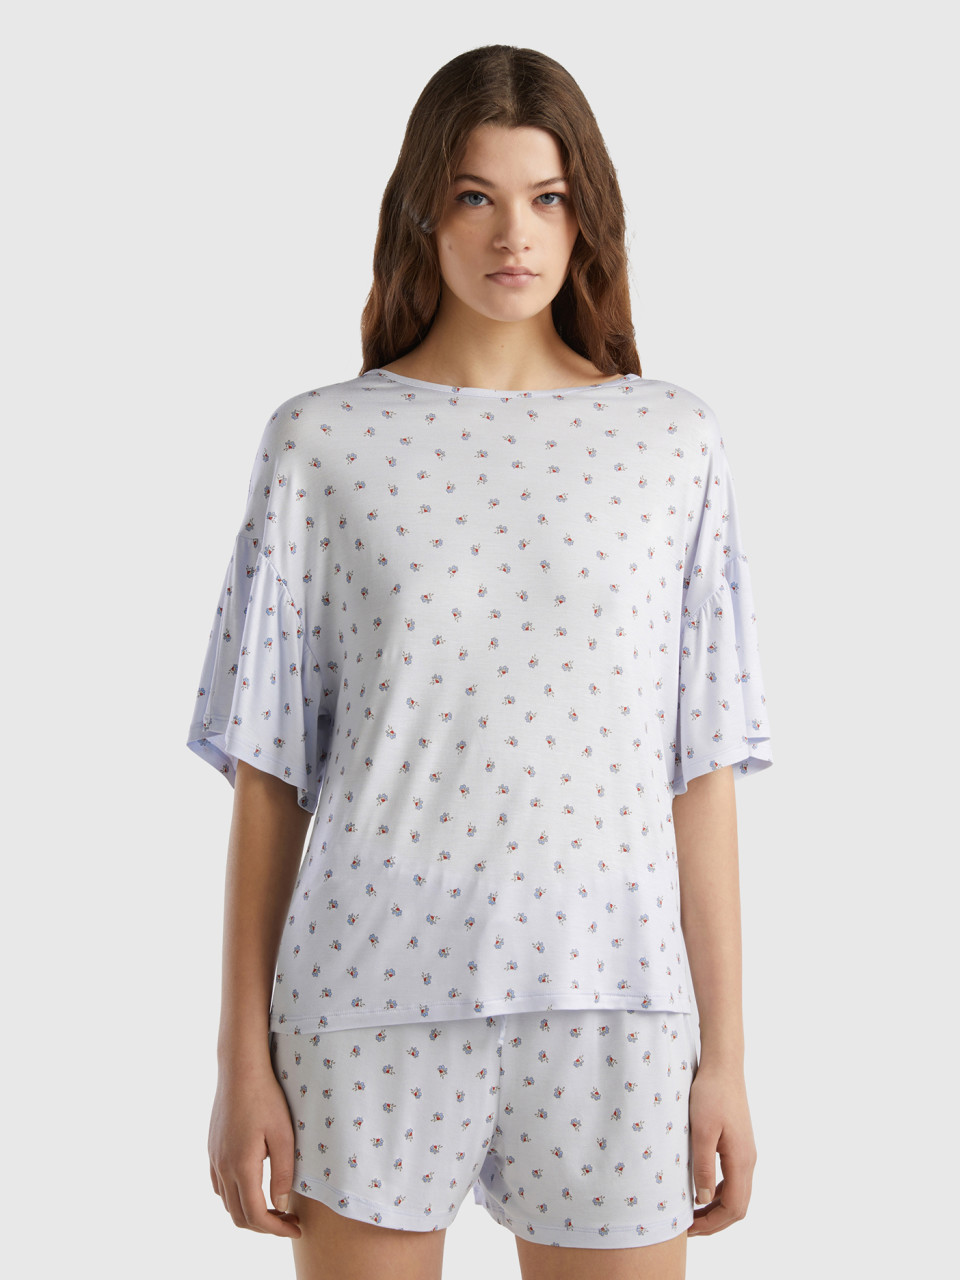 Benetton, Floral T-shirt In Sustainable Viscose, White, Women